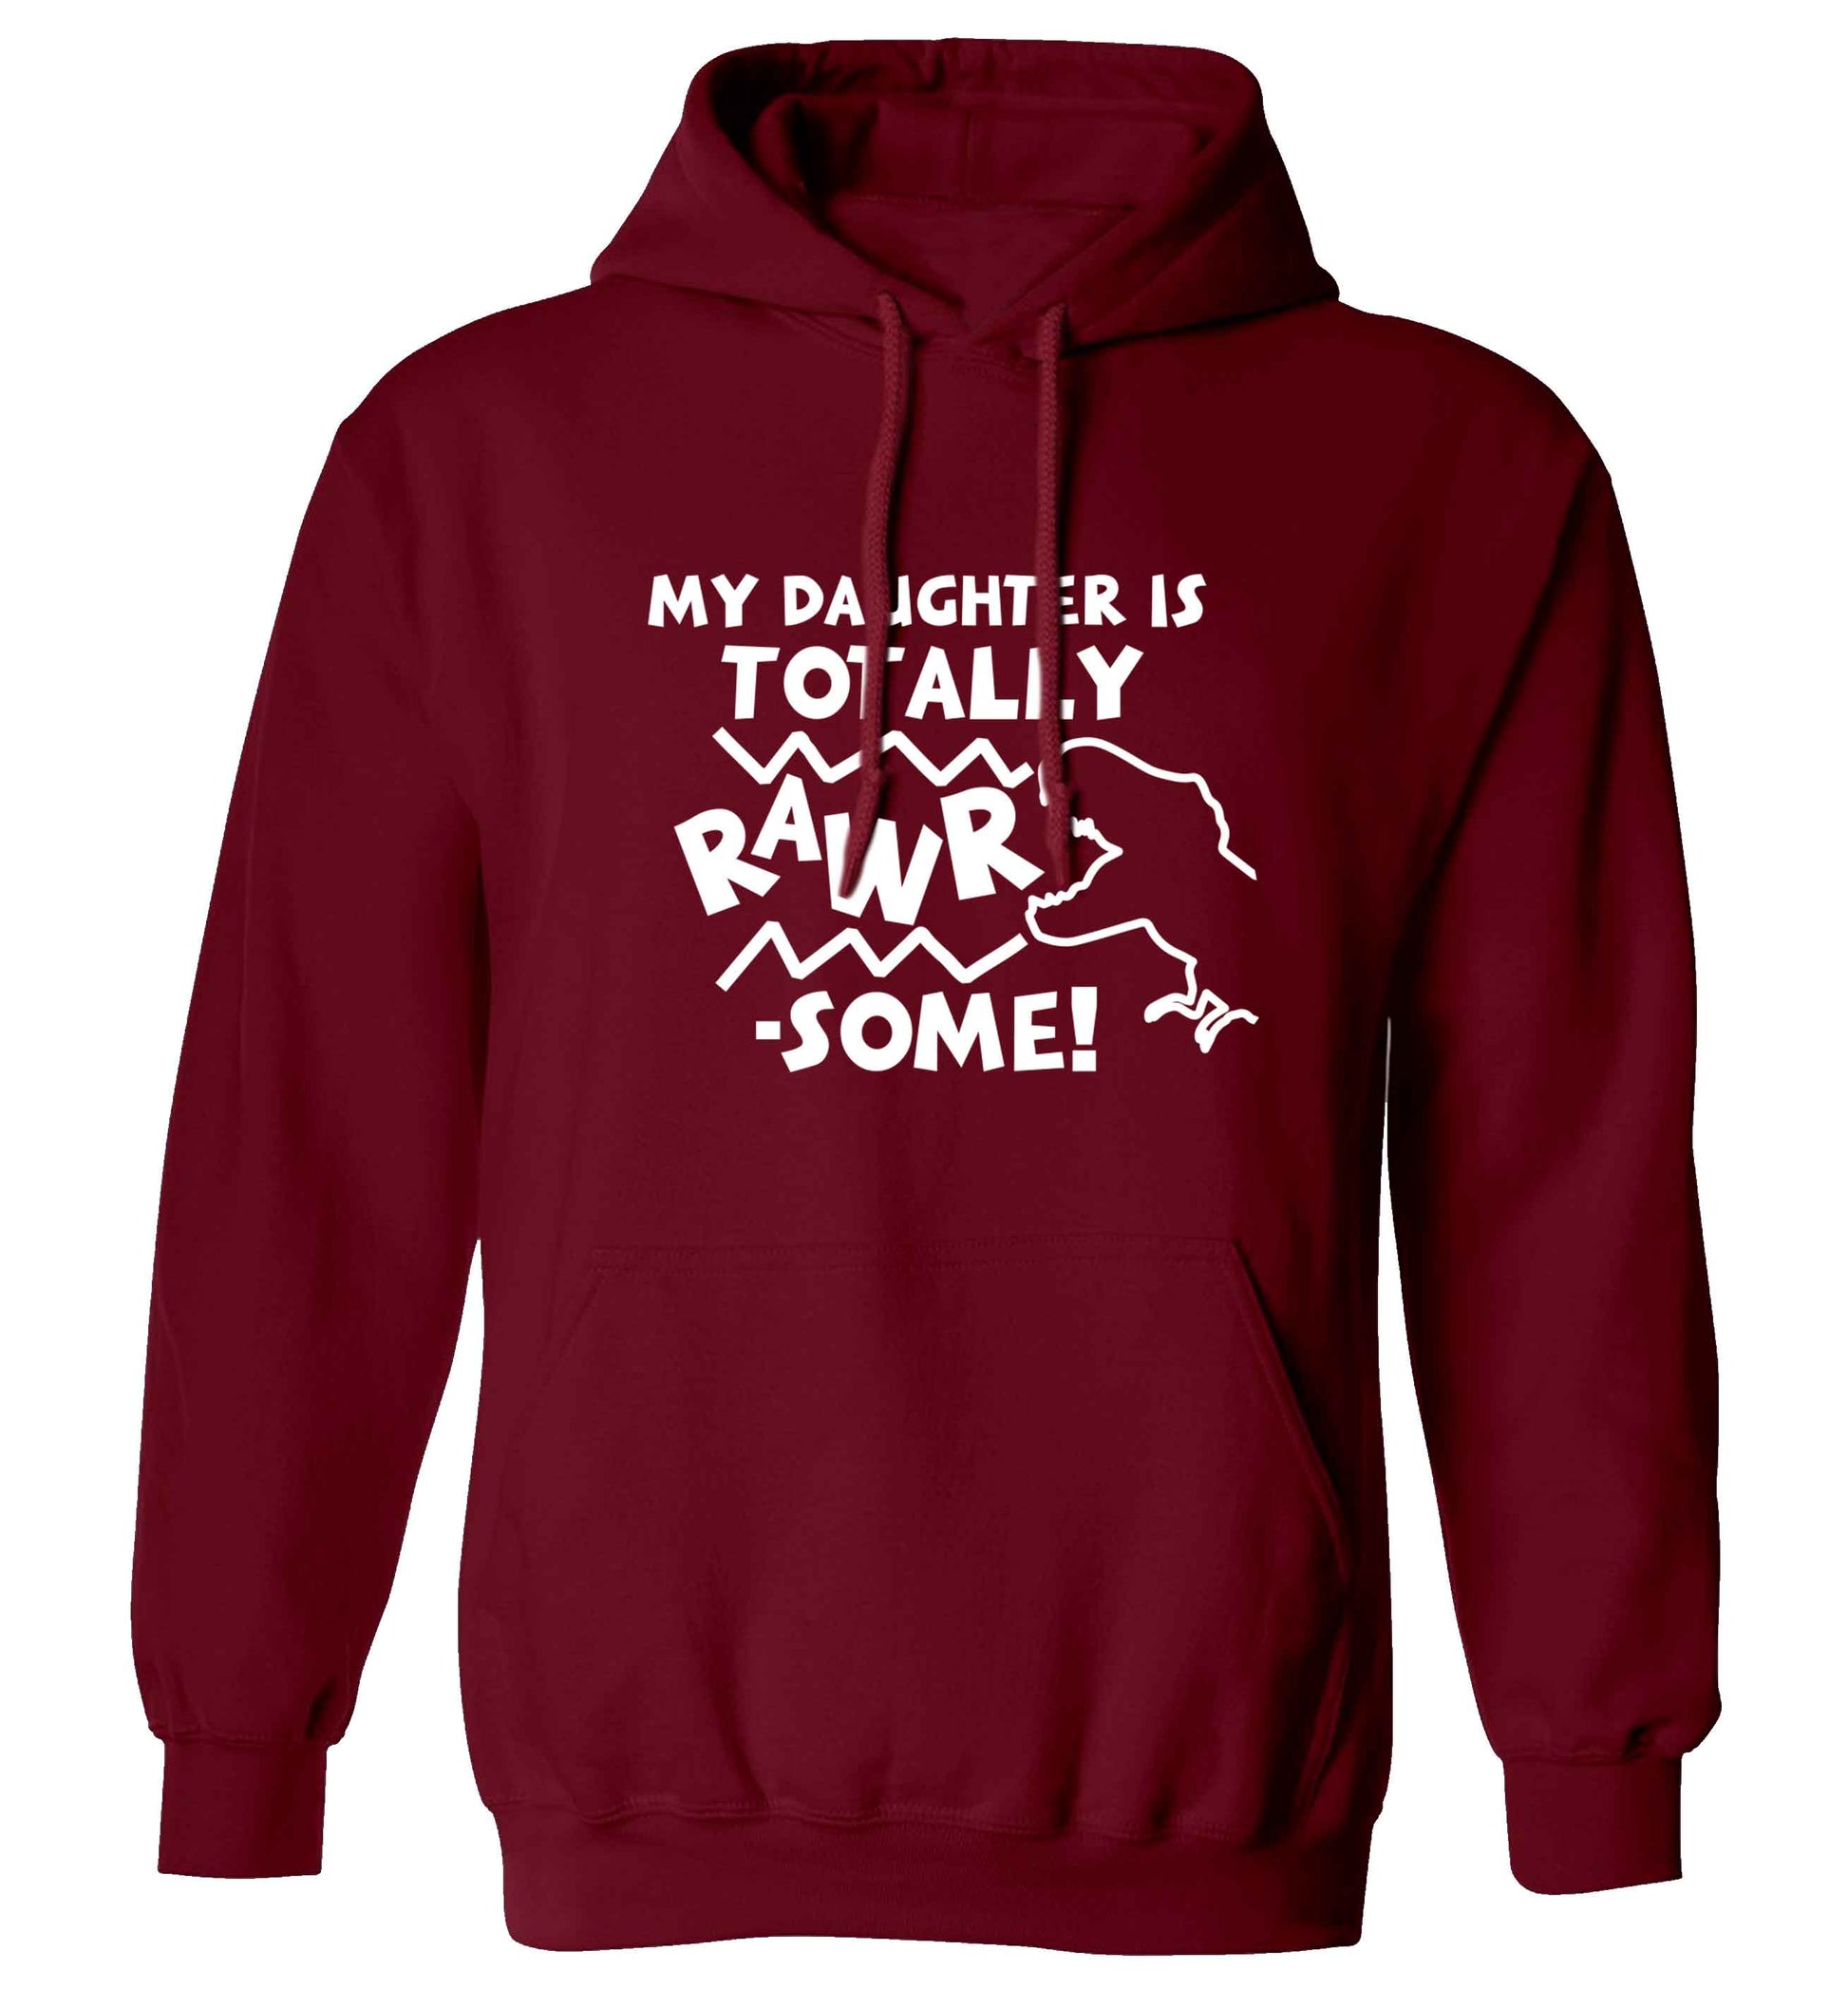 My daughter is totally rawrsome adults unisex maroon hoodie 2XL